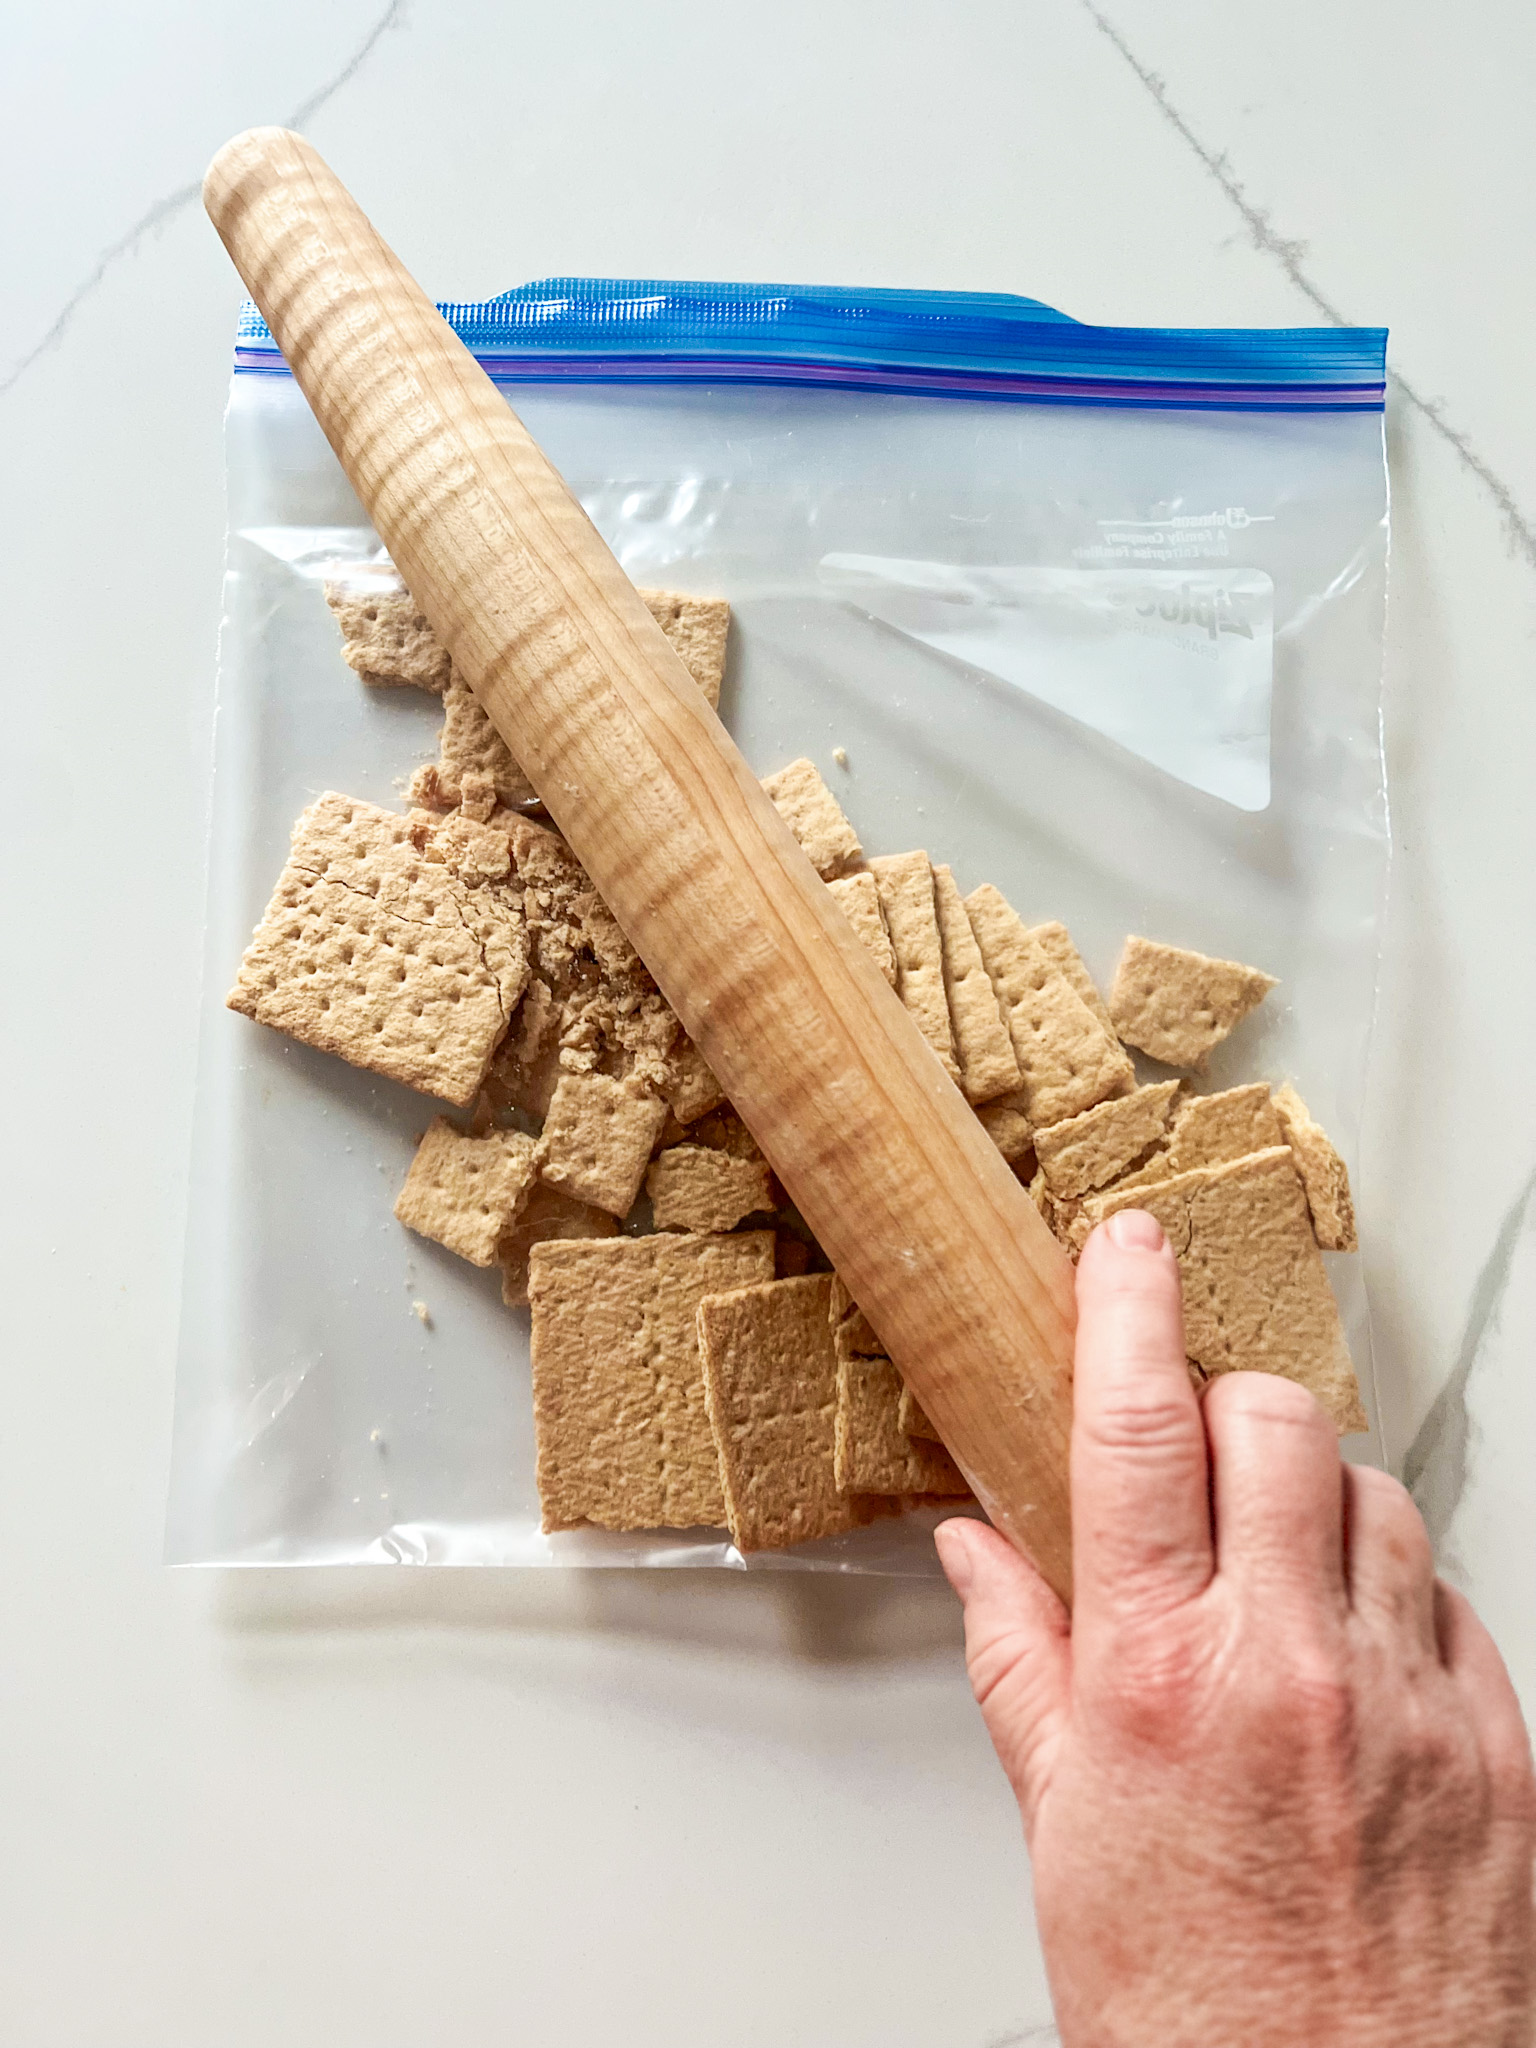 Hand using a rolling pin to pound graham crackers in a plastic bag